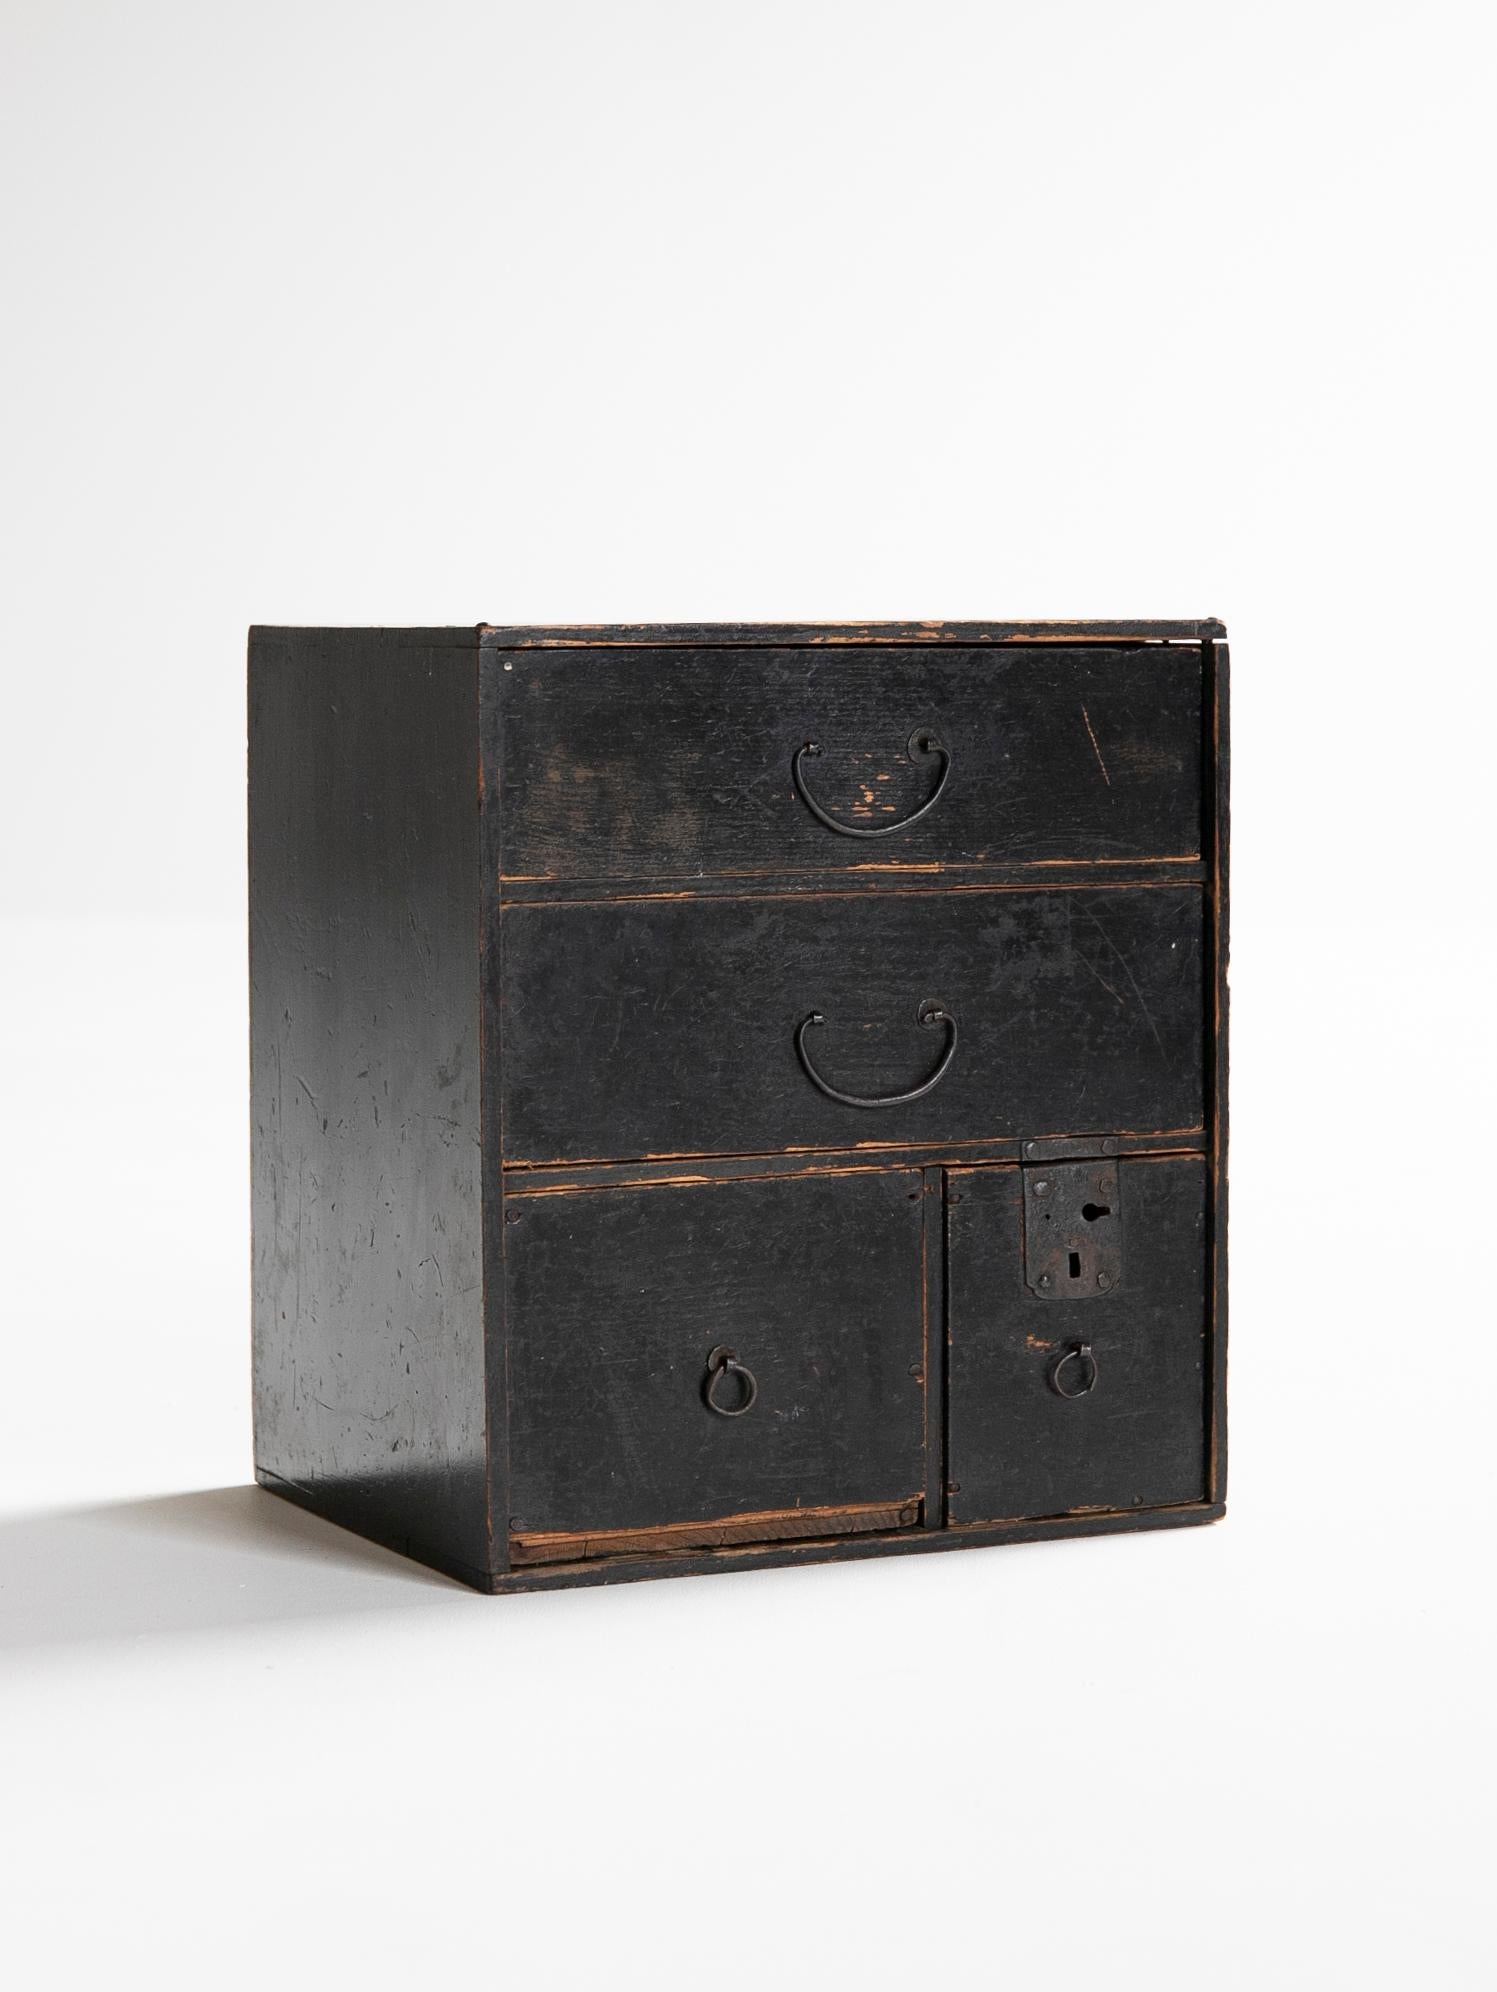 We have a uniquely Japanese aesthetic.
And thanks to our Japanese sourcing channels and our experience, we are the only ones who can introduce unique items that no one else can imitate.

This is a drawer-type chest of drawers made between the end